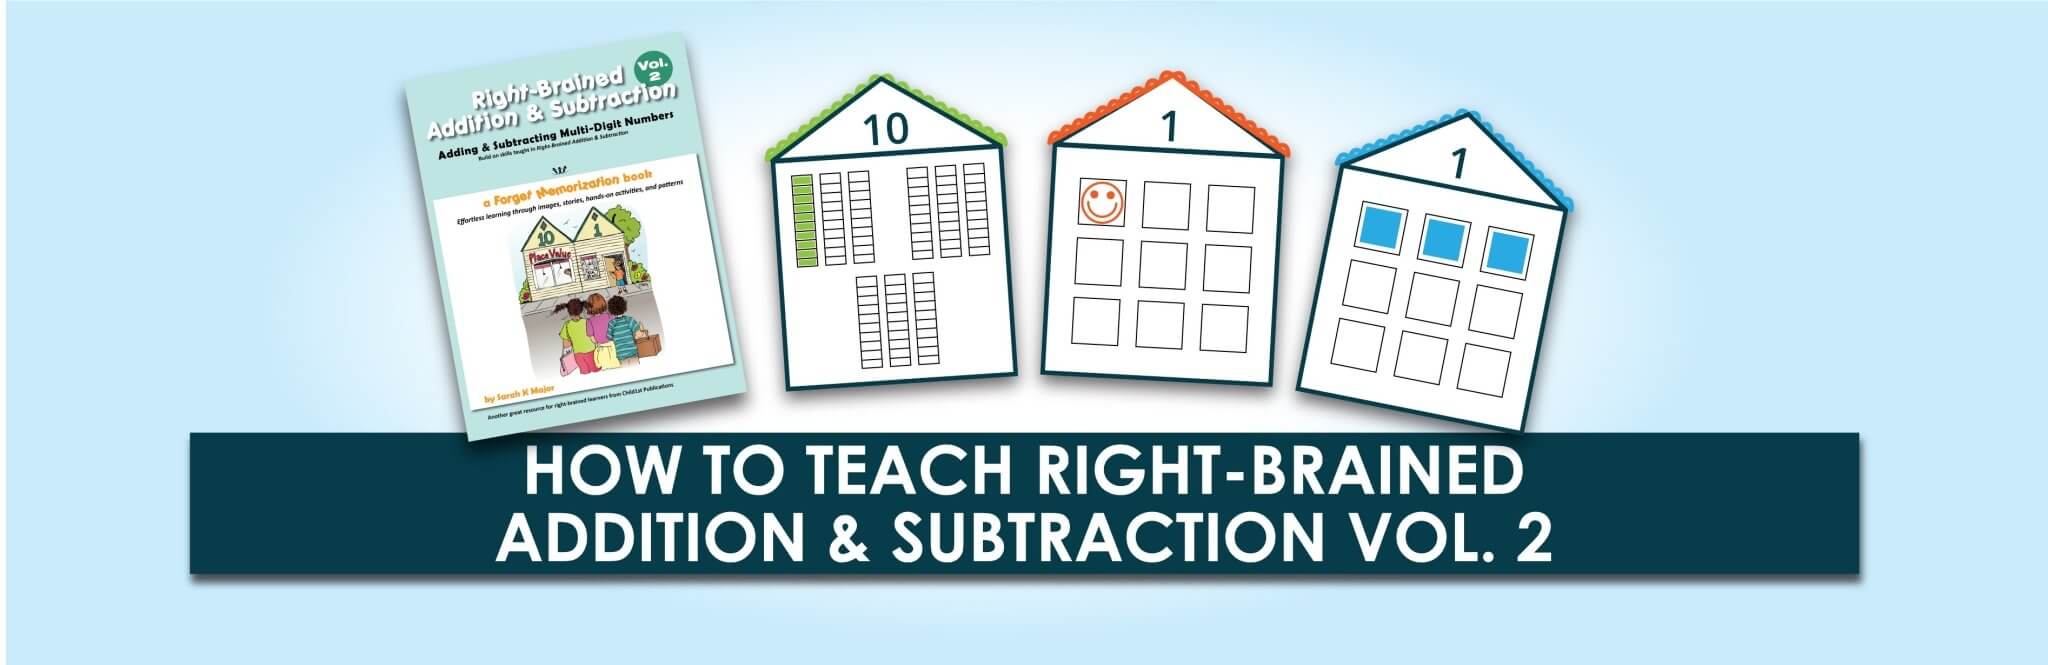 How To Teach Right-Brained Addition & Subtraction Vol. 2